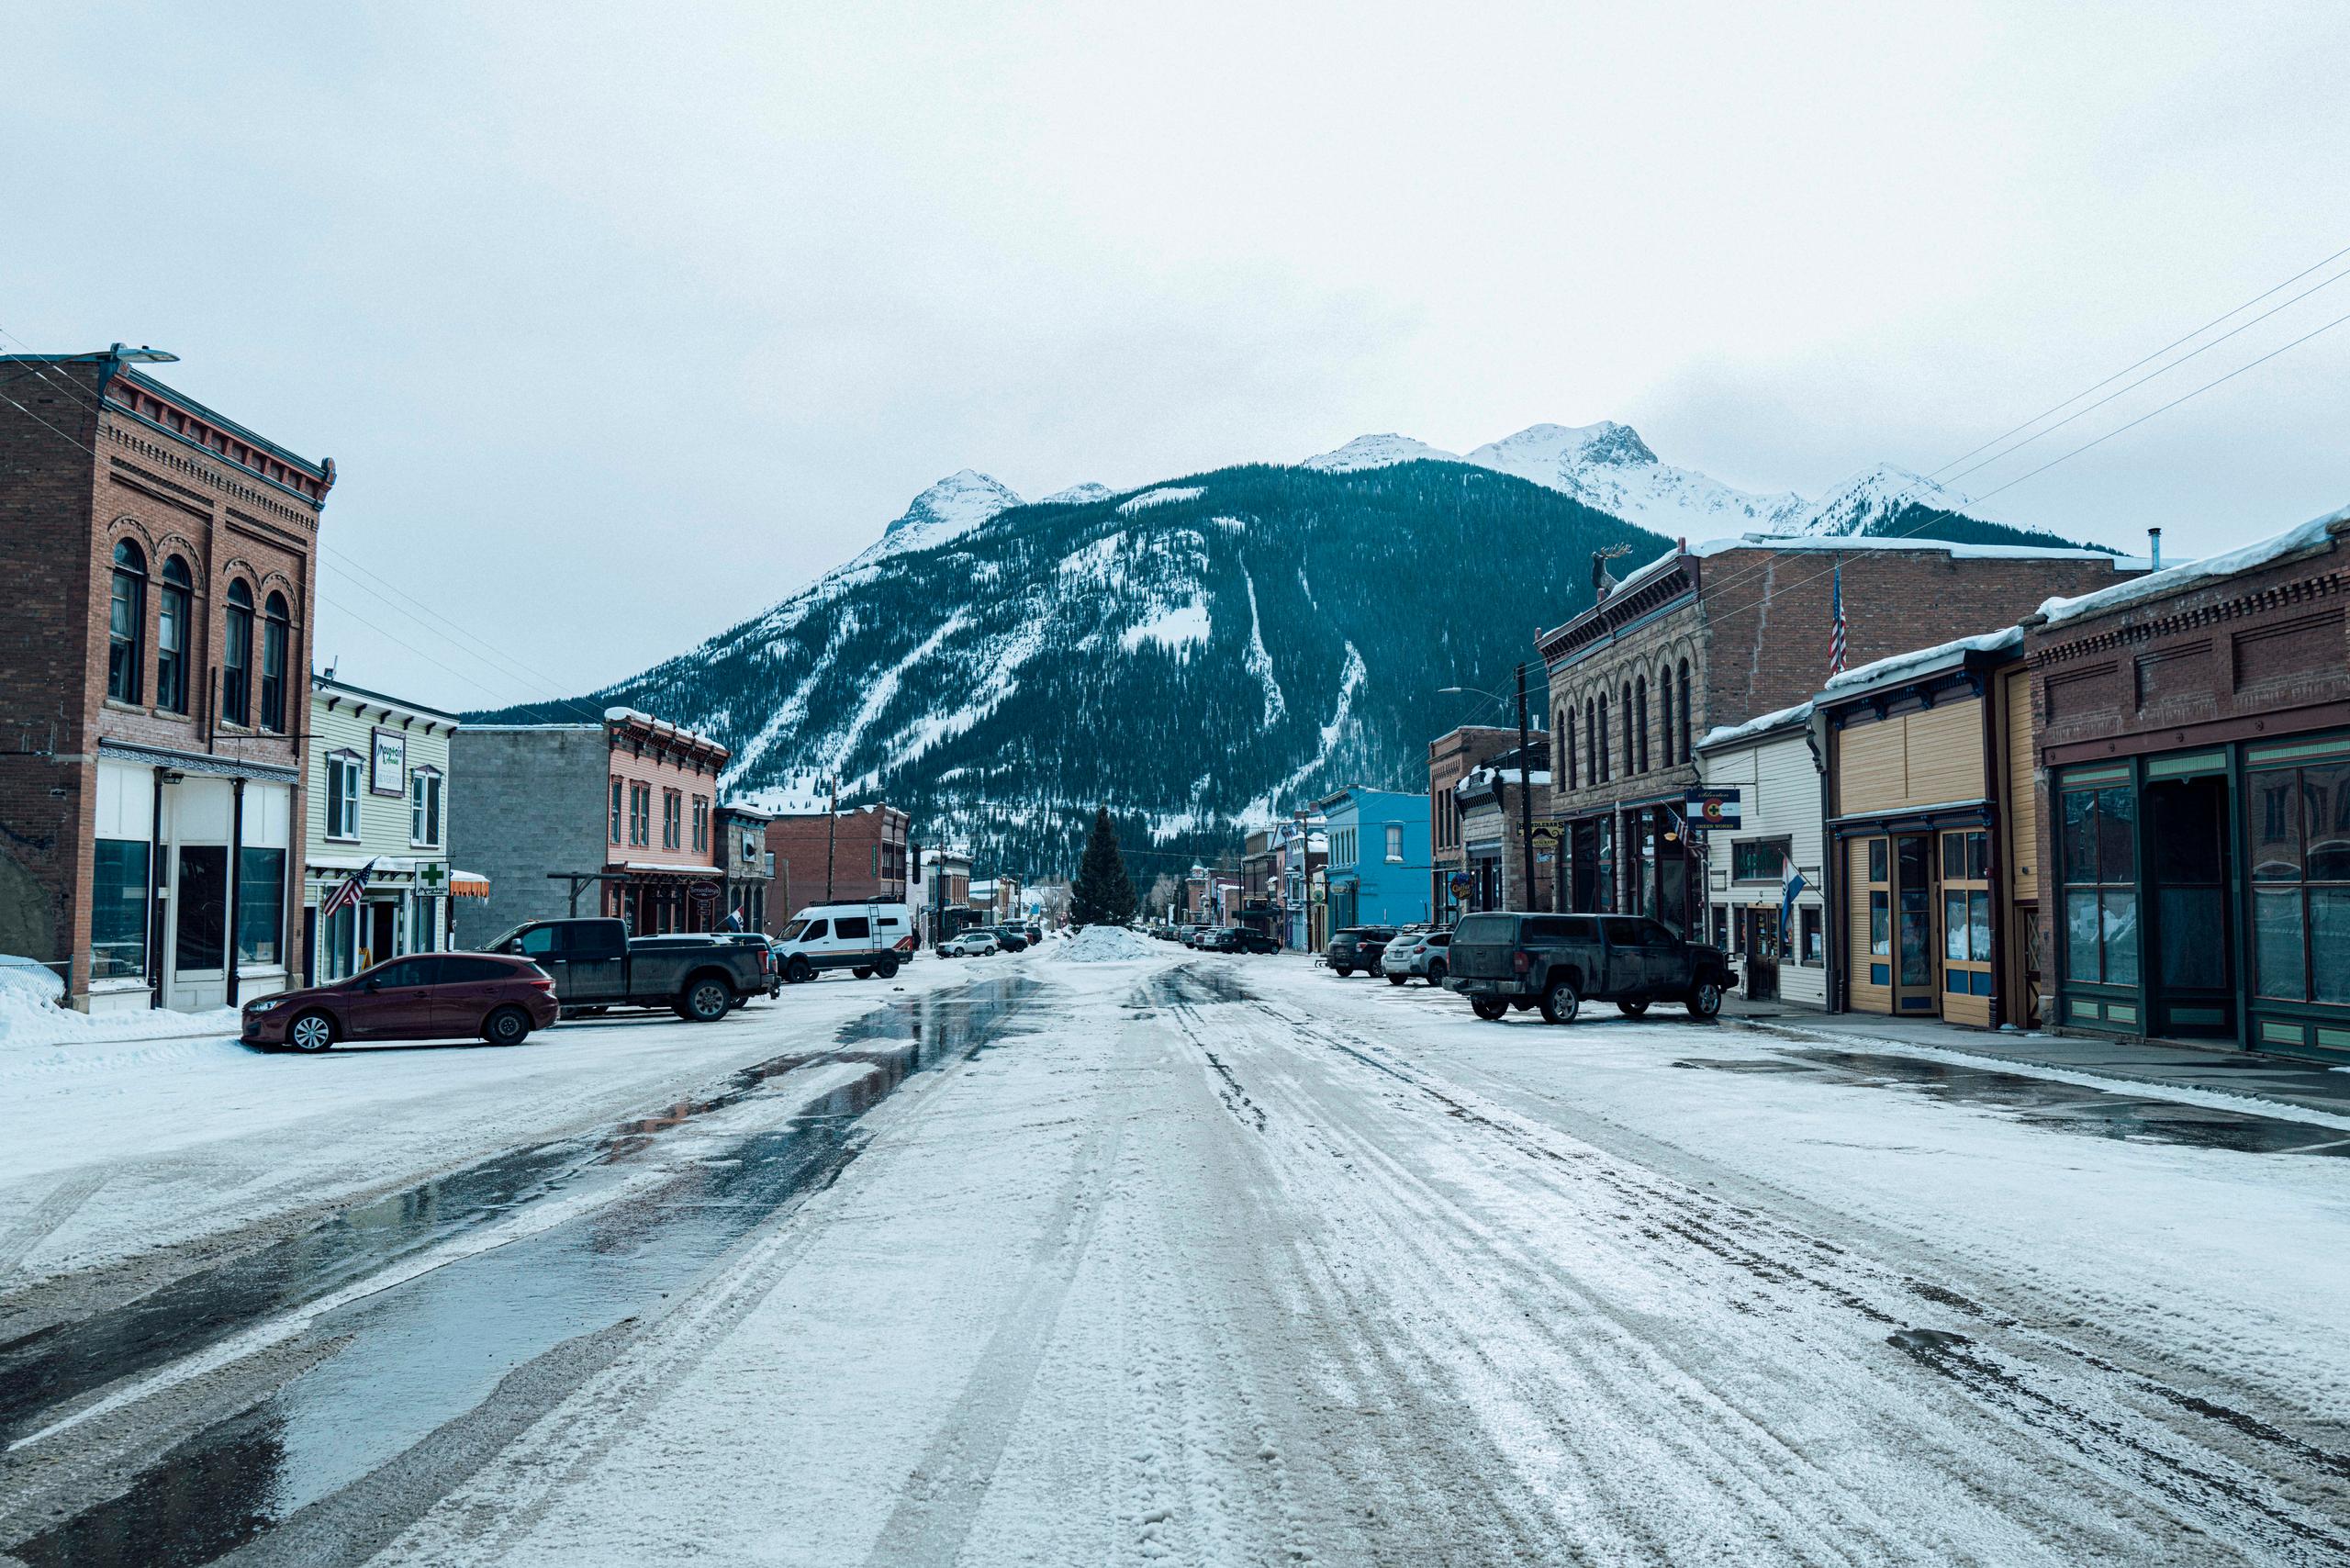 View of Silverton main street overlooking mountains in background